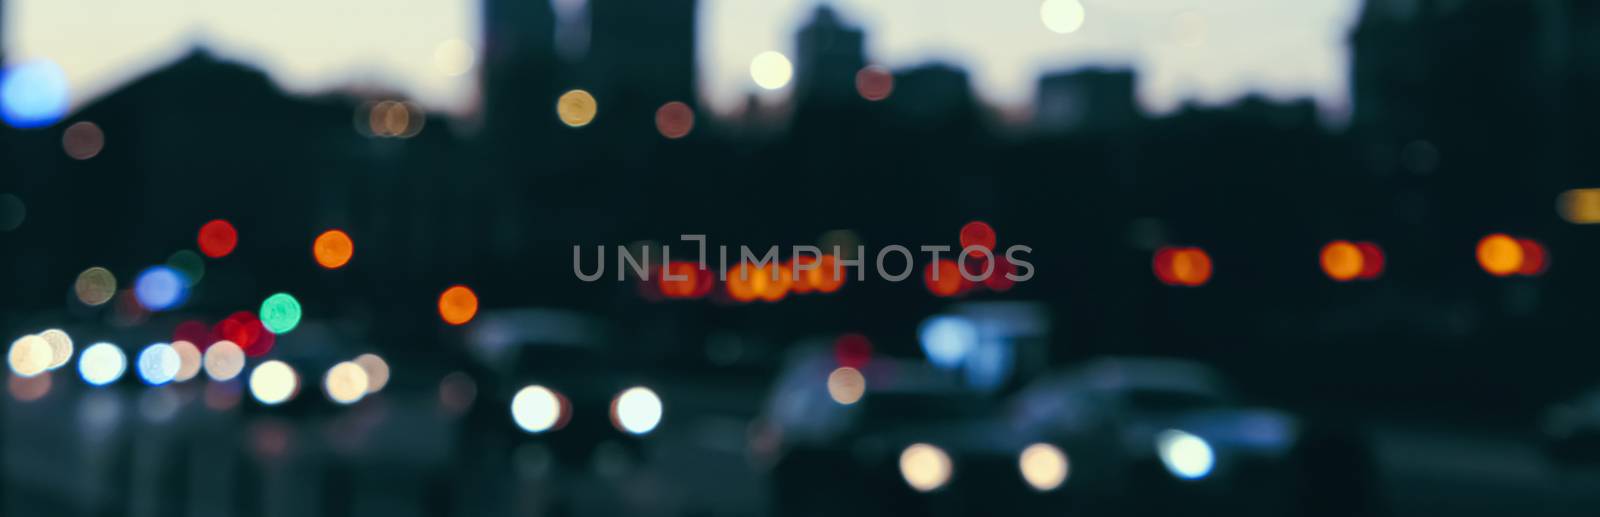 Blurry cityscape silhouette of a European city as background, evening view by Anneleven